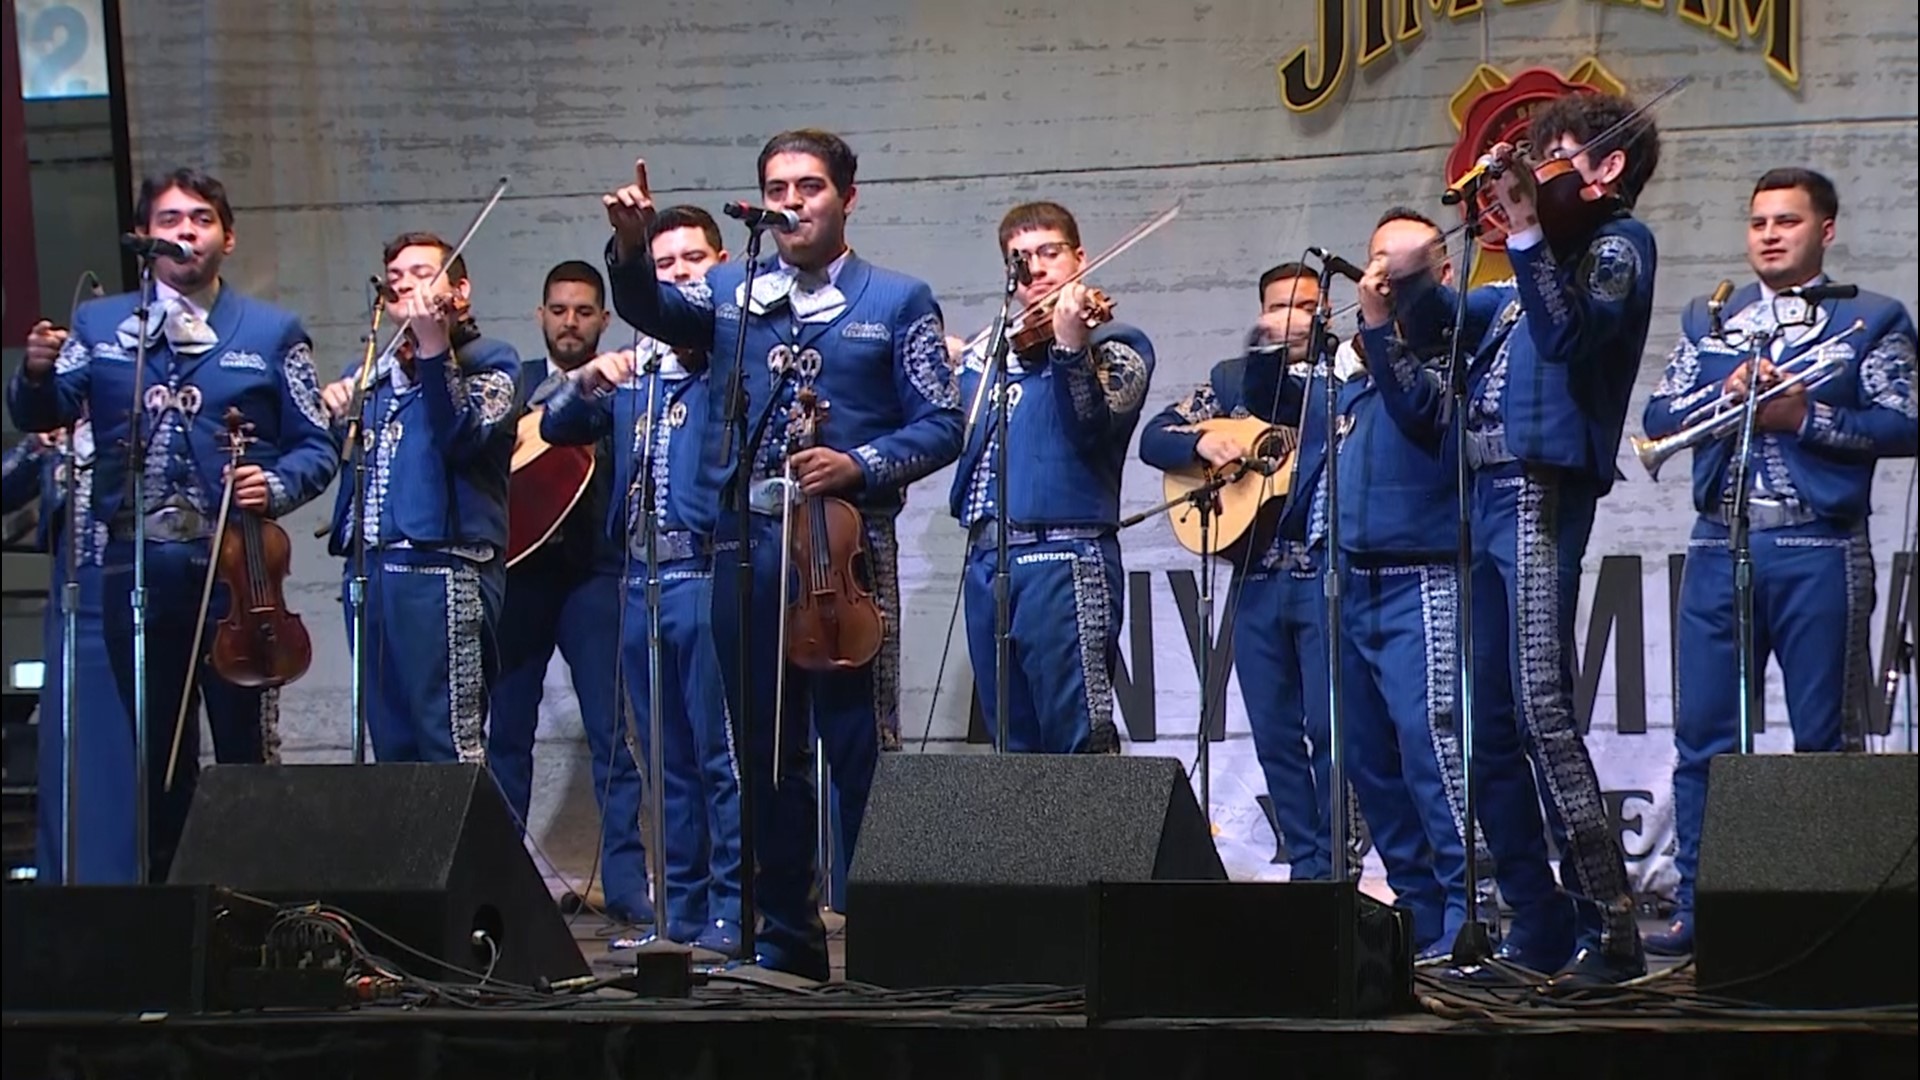 Mariachi Imperial de America has been competing in RodeoHouston's mariachi contest dating back to the late 90s.